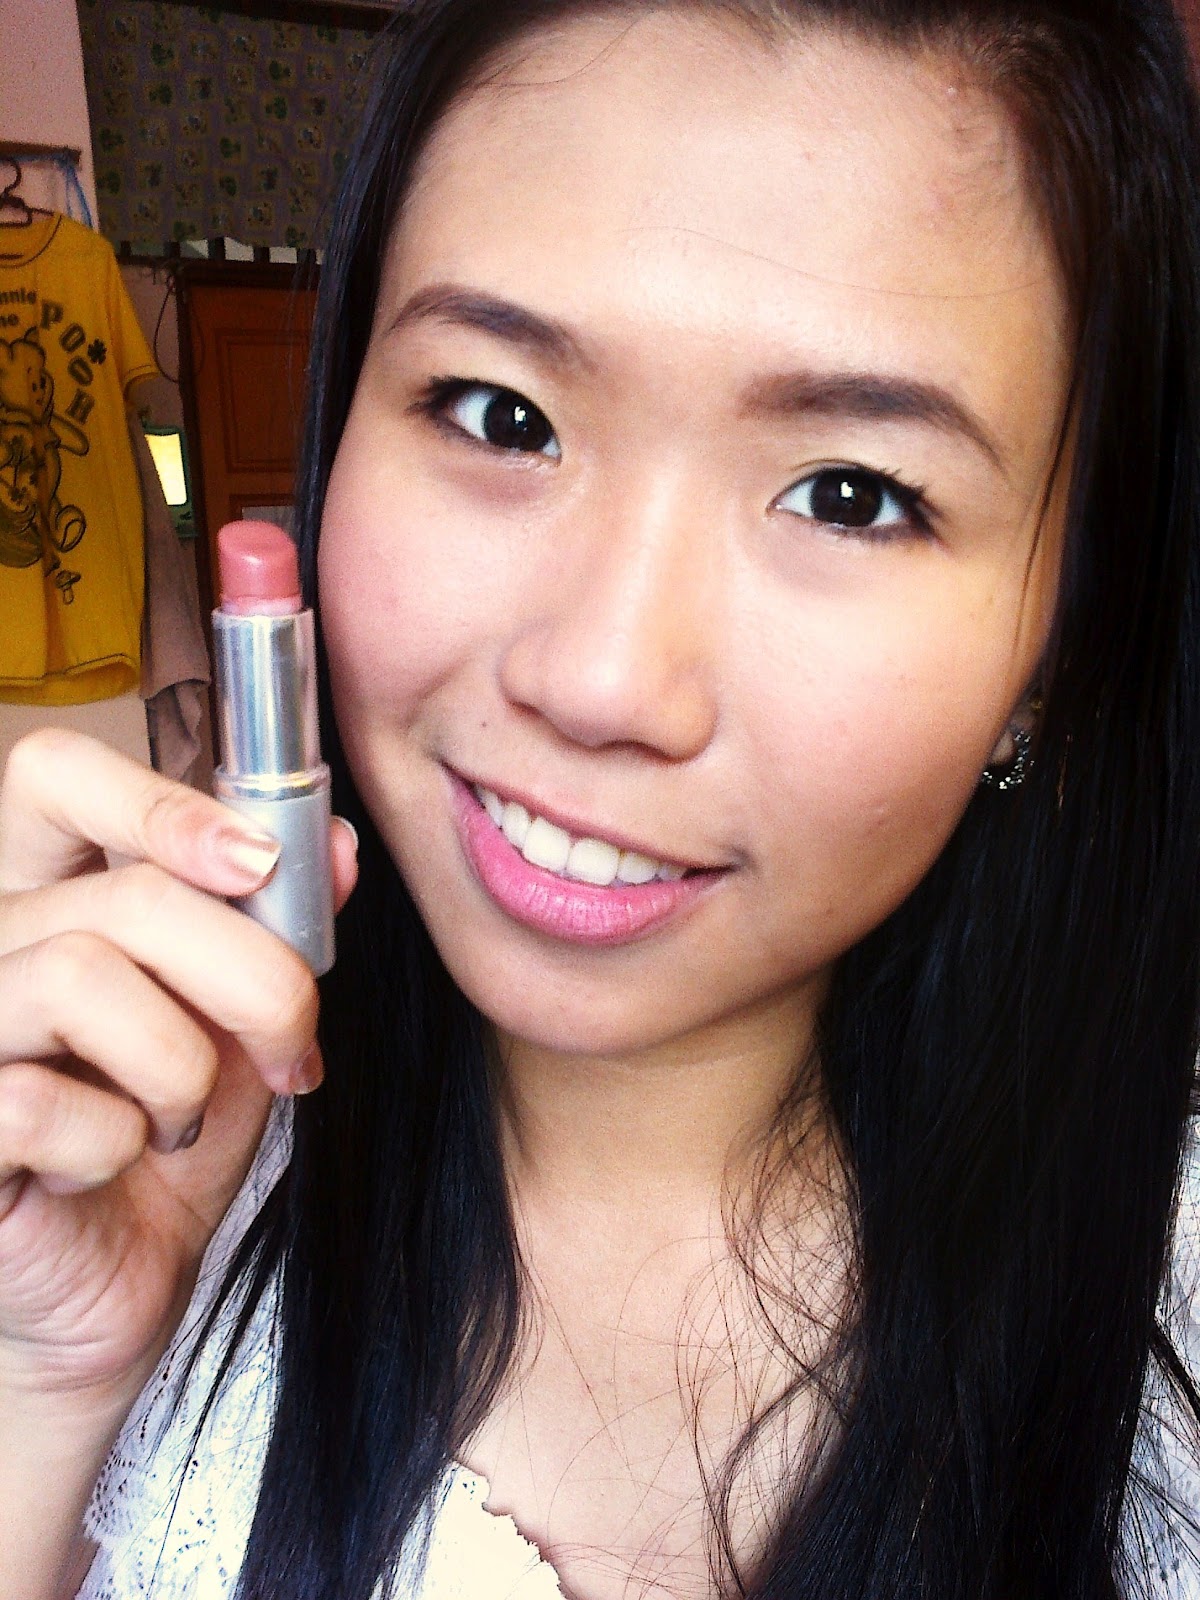 EleanorDreamLand: Fully Hydrated Lips - Muackx!